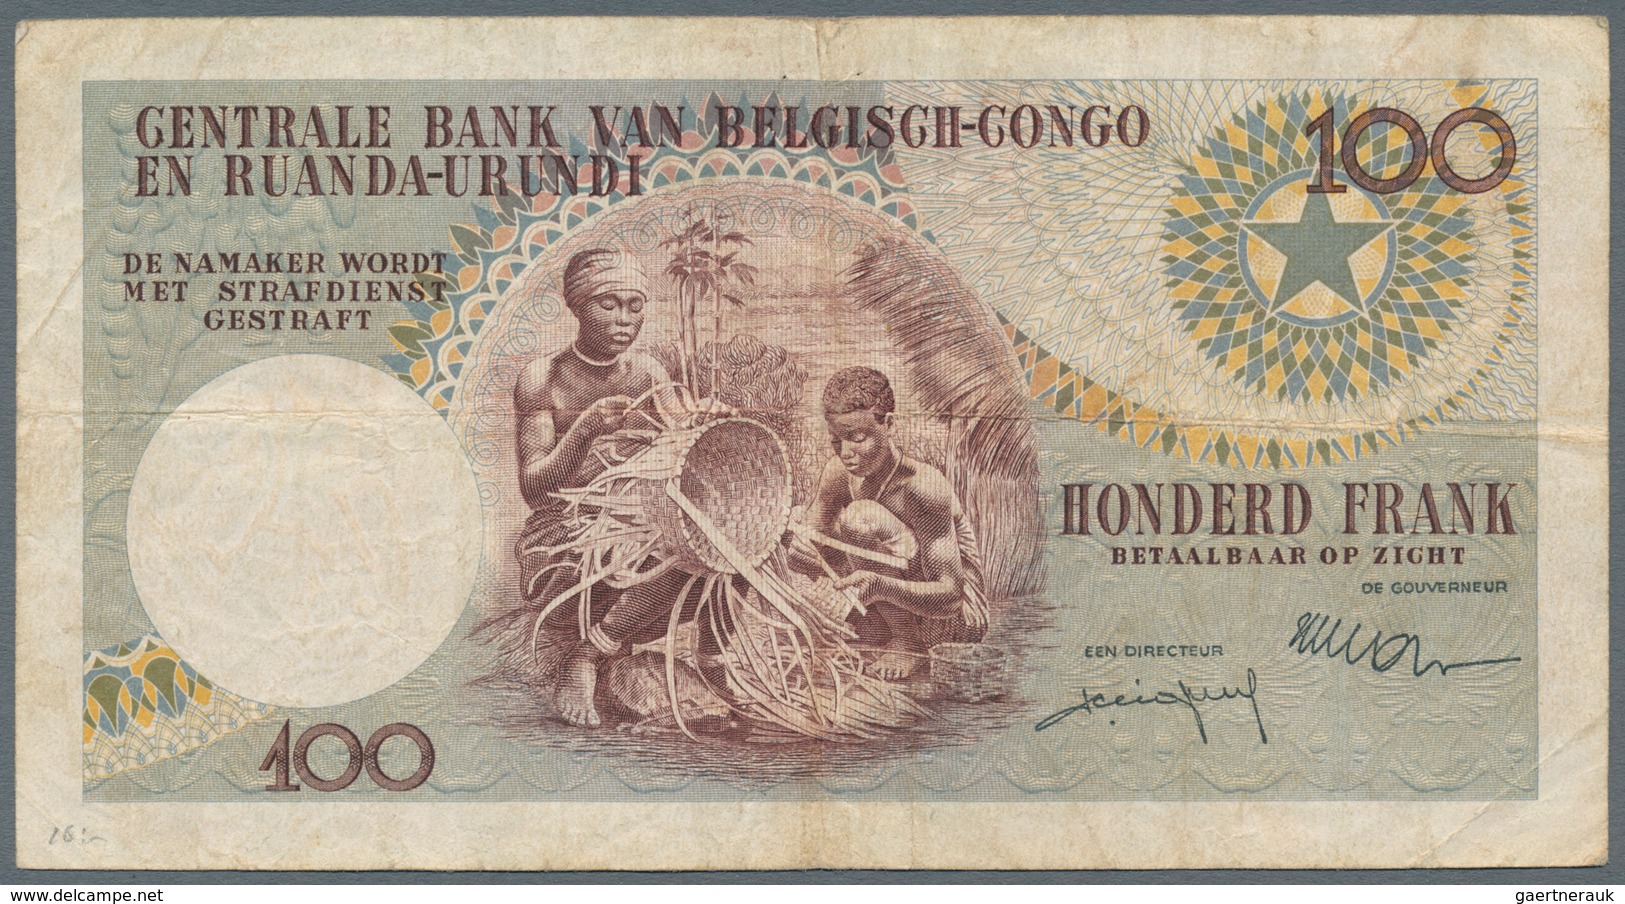 Belgian Congo / Belgisch Kongo: Very nice set with with 7 banknotes comprising 5 Francs 1947, 10 Fra